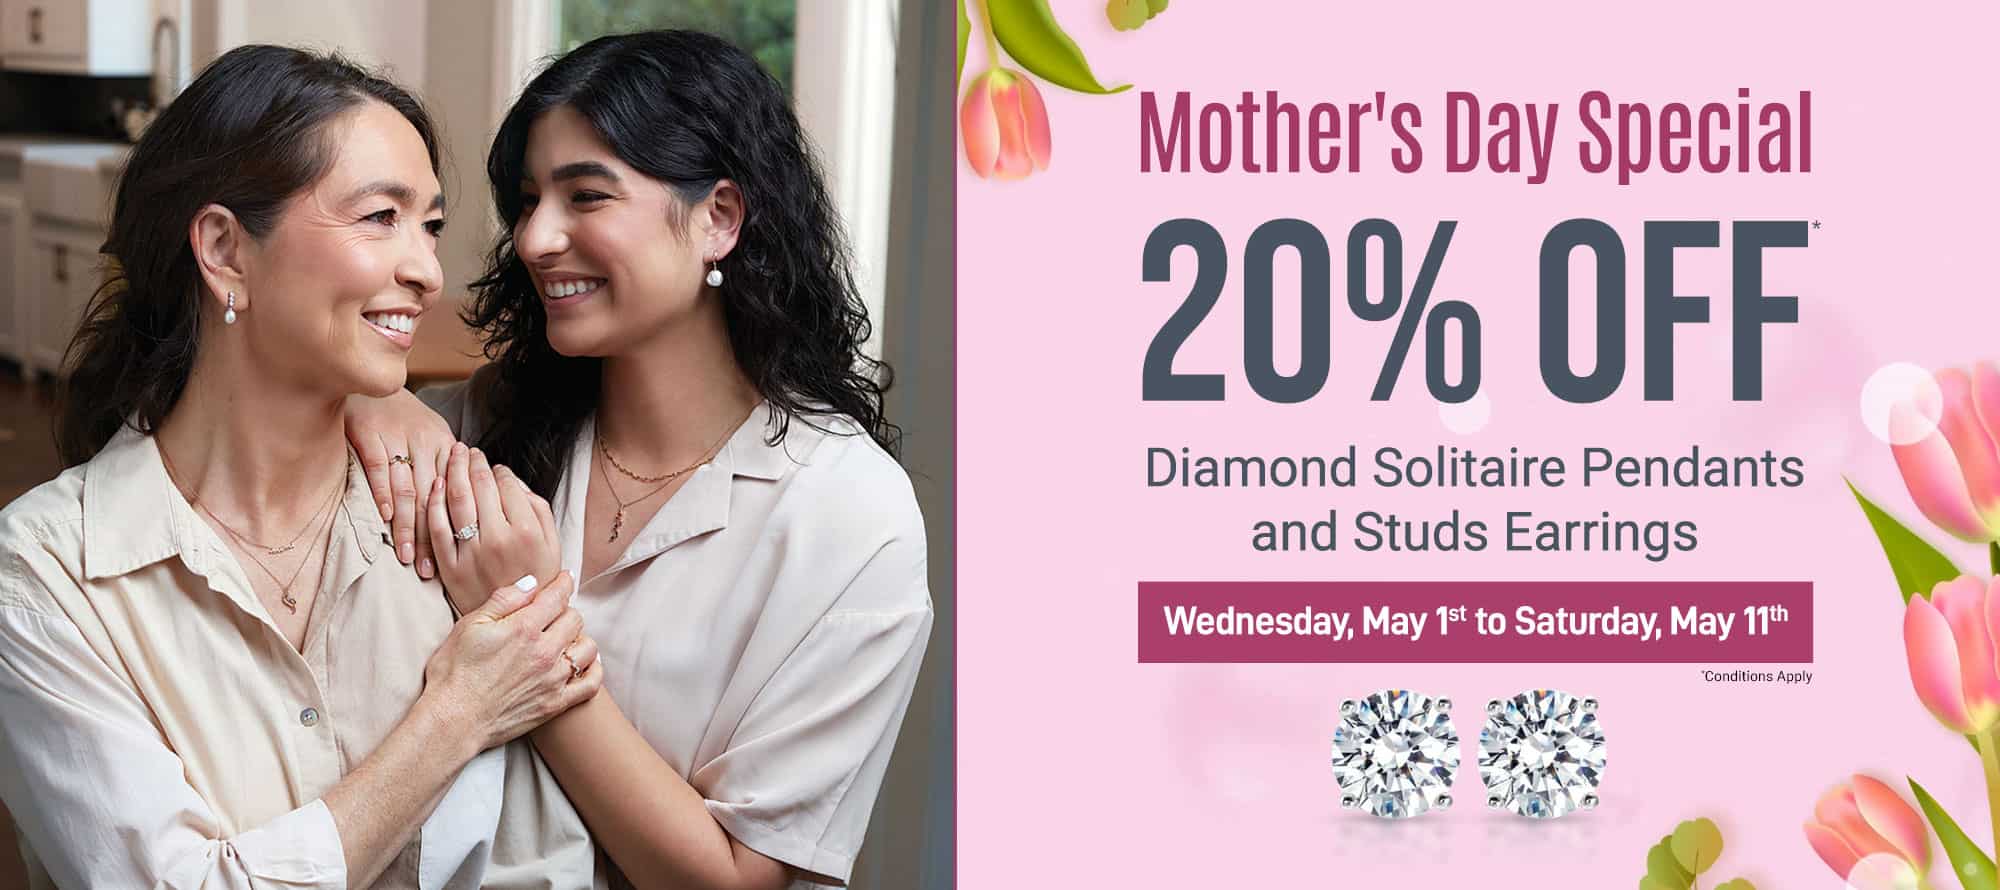 Mothers Day Offer at Bowman Jewelers